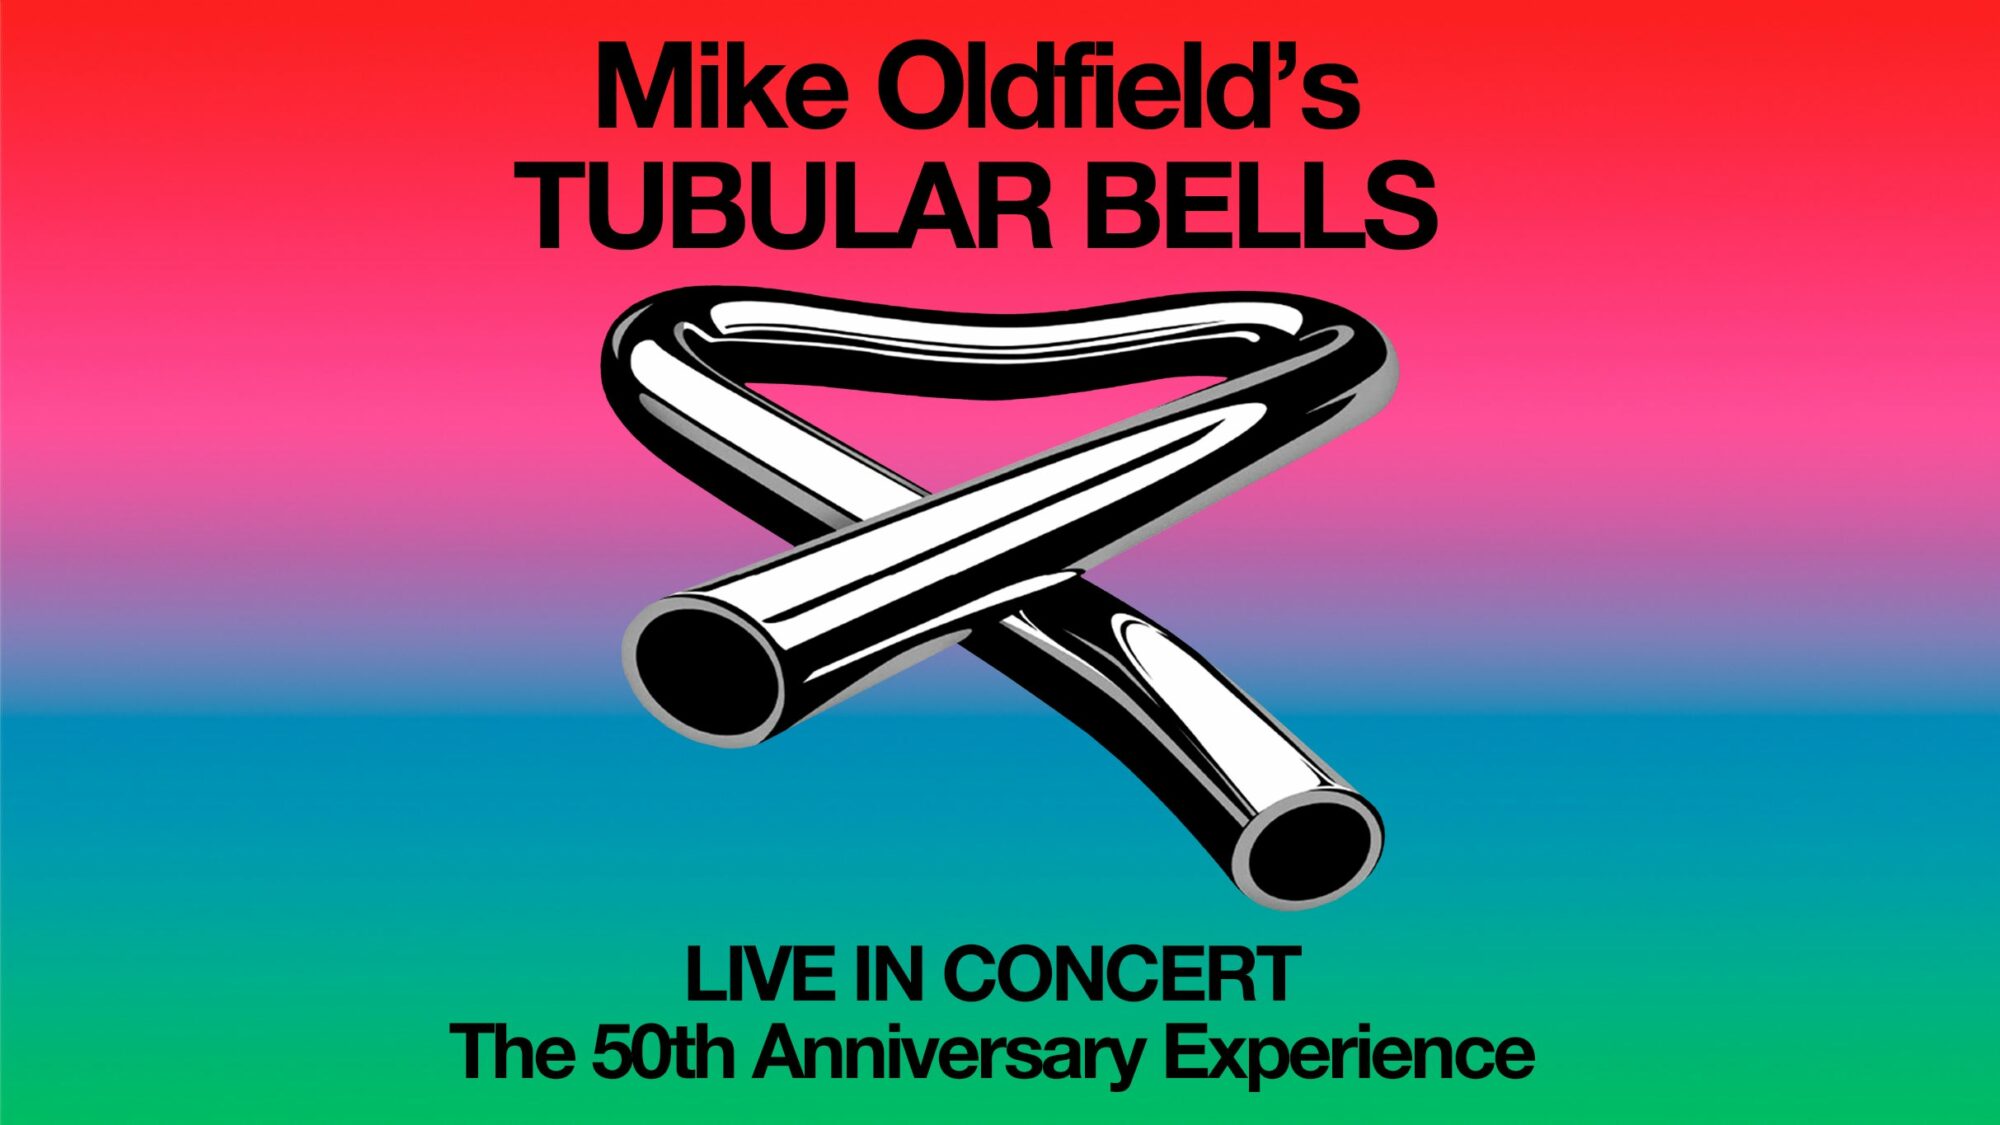 Image name Mike Oldfields Tubular Bells 50th Anniversary Tour at Sheffield City Hall Oval Hall Sheffield the 2 image from the post Events in Yorkshire.com.